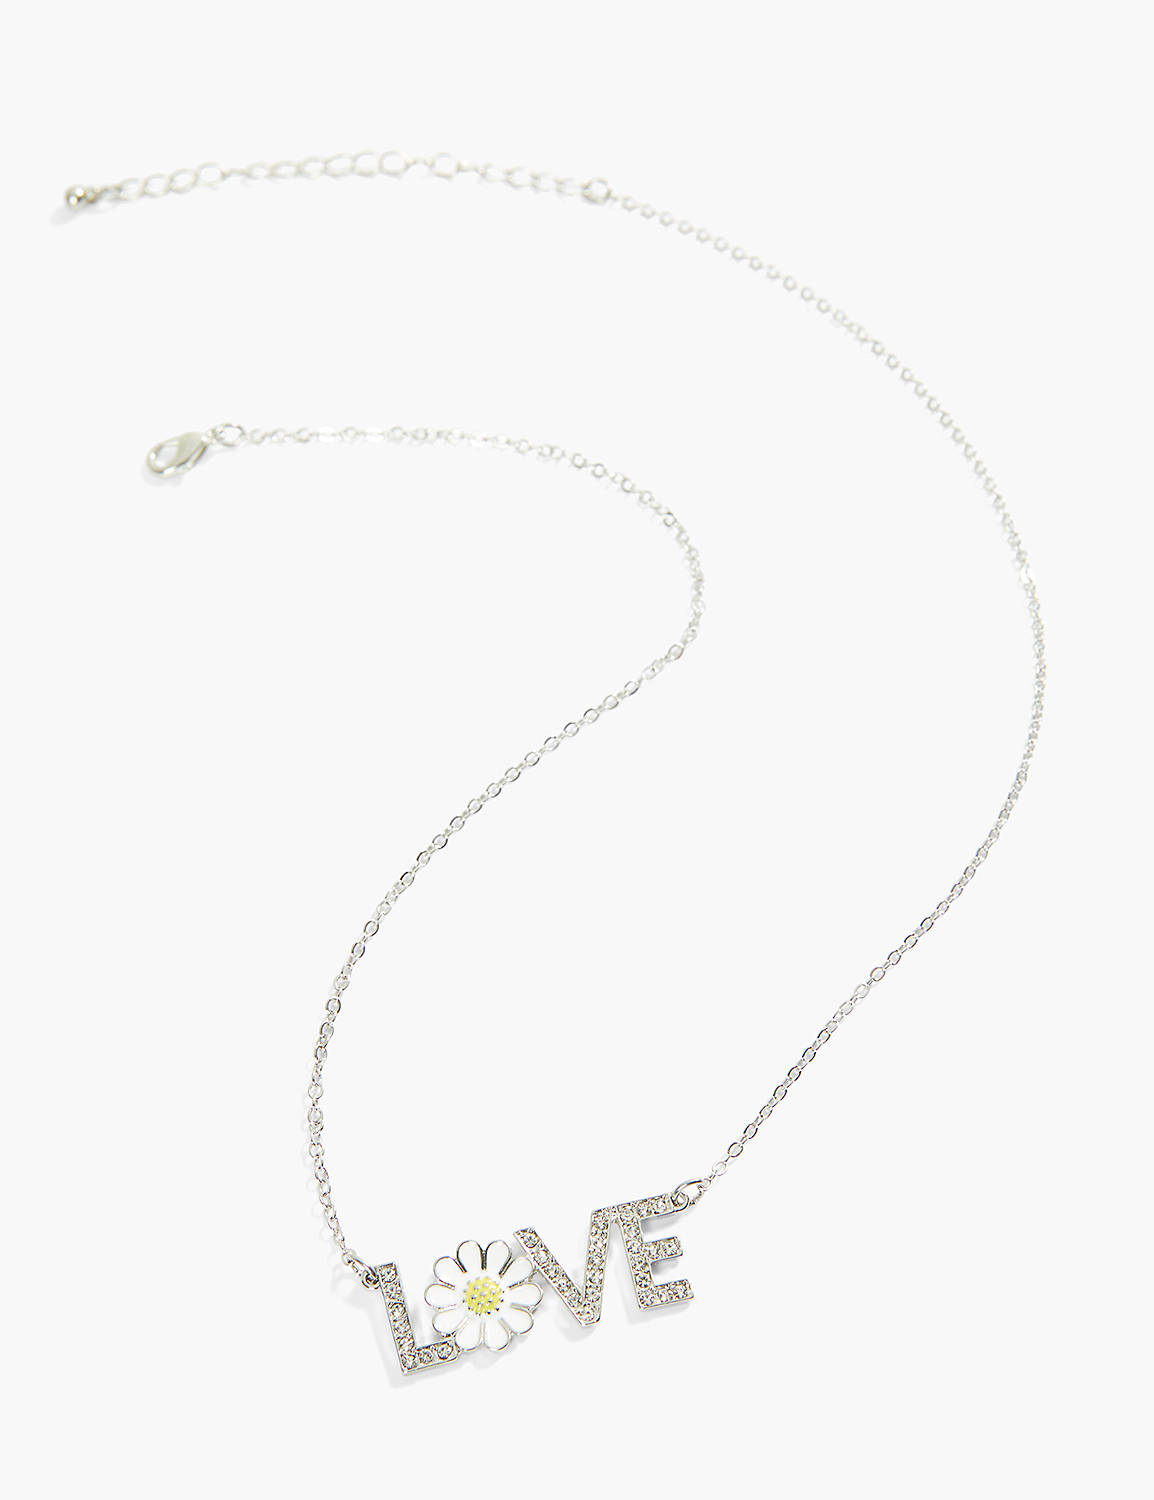 LOVE DAISY NECKLACE Product Image 1